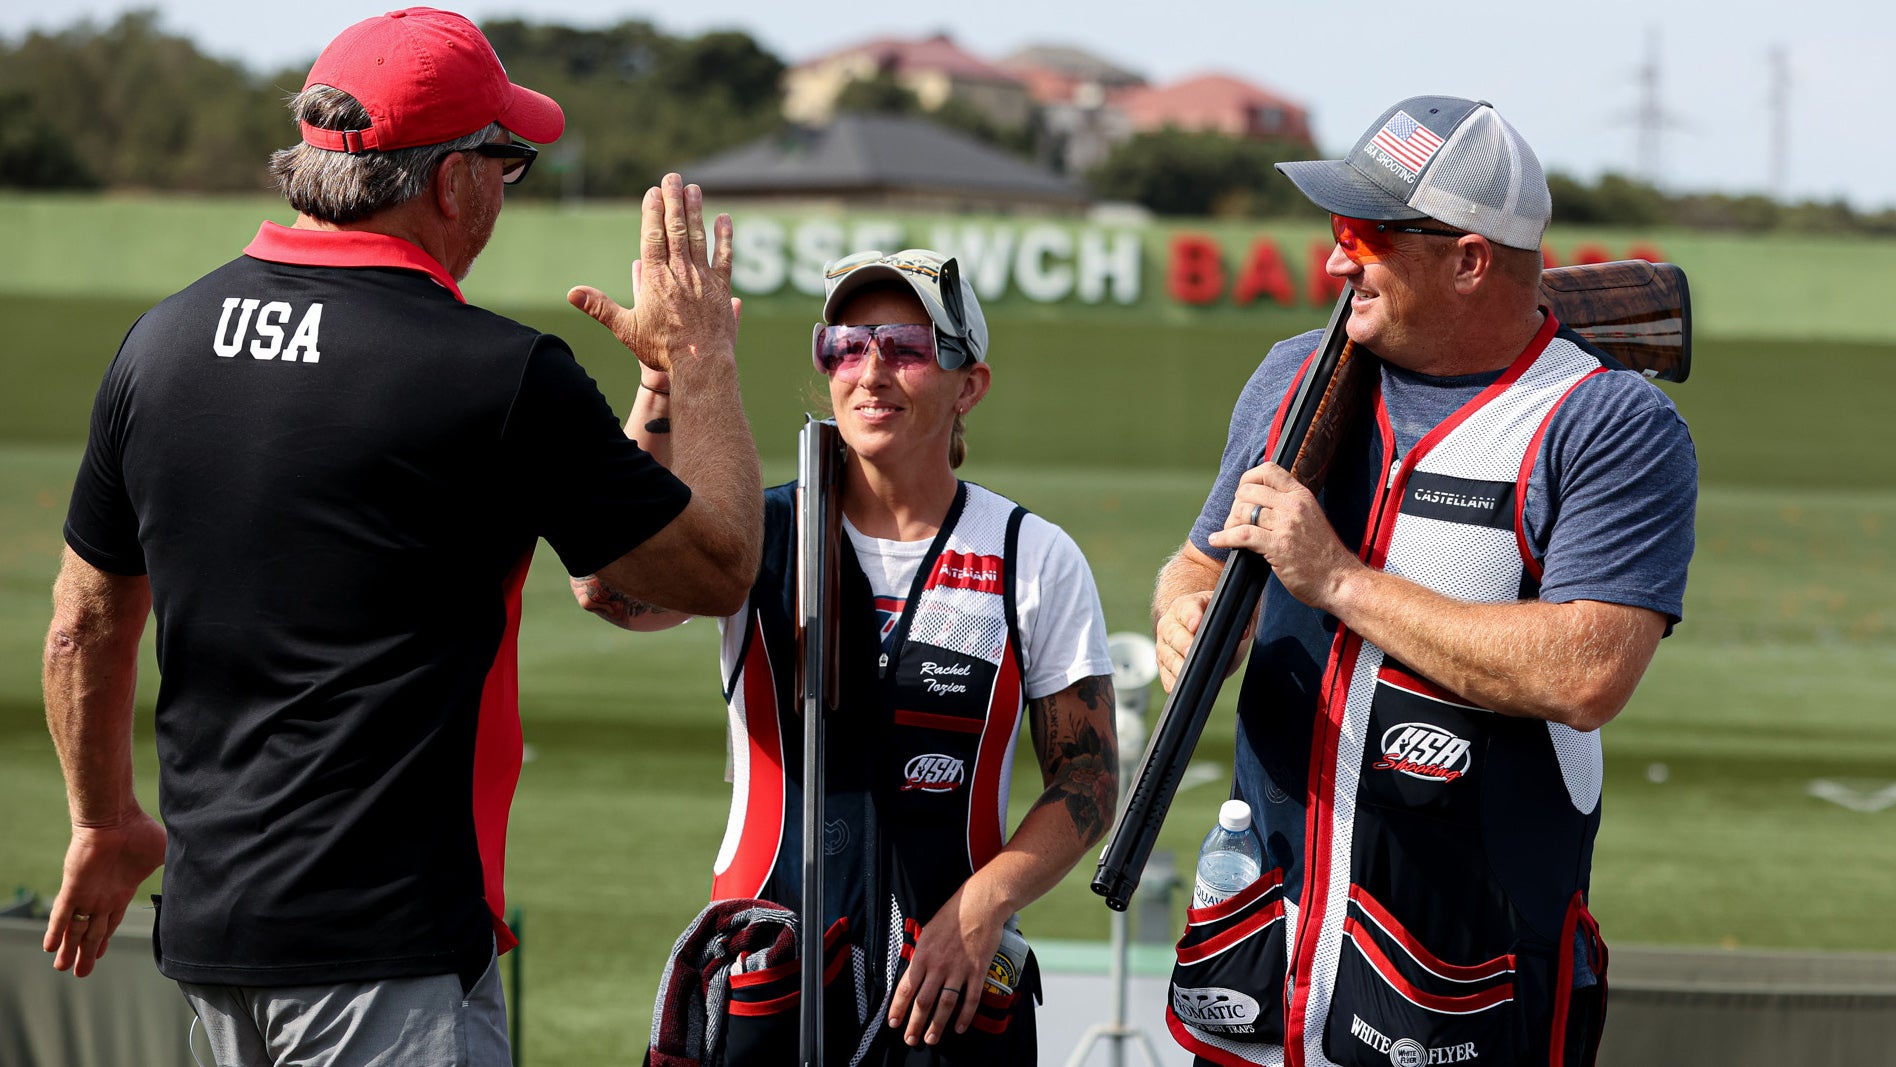 Staff Sgt. Rachel Tozier (middle) high fives her USA Shooting coach Jay Waldron at the 2023 International Shooting Sports Federation World Championship in Baku, Azerbaijan, Aug. 14 - Sept. 1. Tozier and 2020 Olympian Derrick Mein won the Silver Medal in the Mixed Trap Team event. Tozier is a marksmanship instructor/competitive shooter, with the U.S. Army Marksmanship Unit who hails from Pattonsburg, Missouri. (USA Shooting photograph by Brittany Nelson)